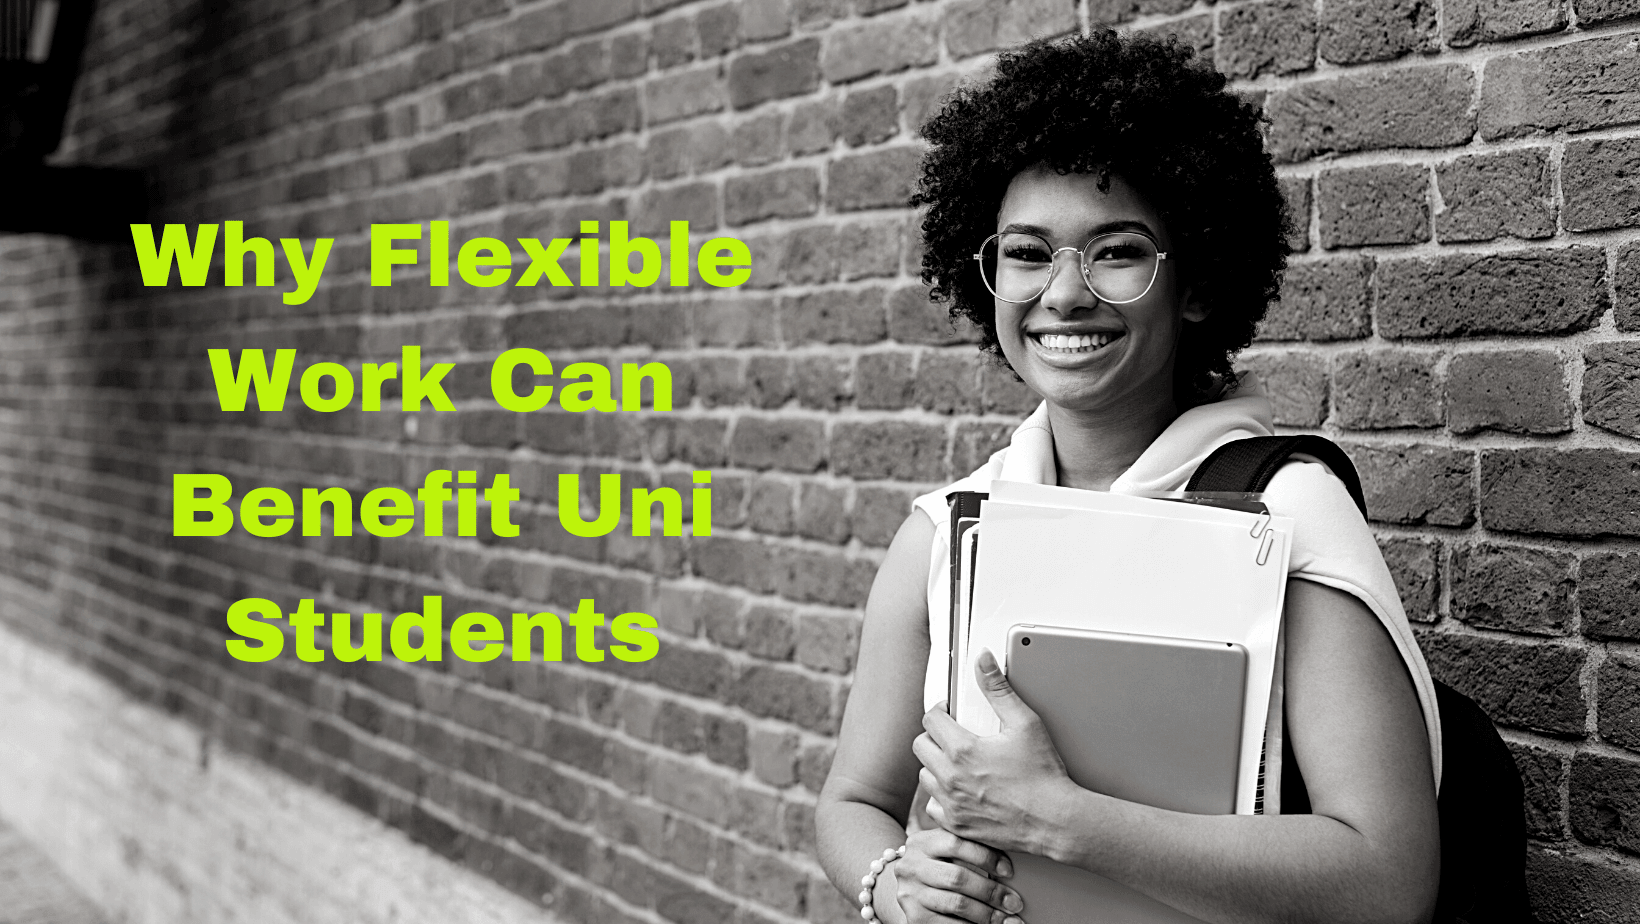 thumbnail for the blog post - Why Flexible Work Can Benefit Uni Students